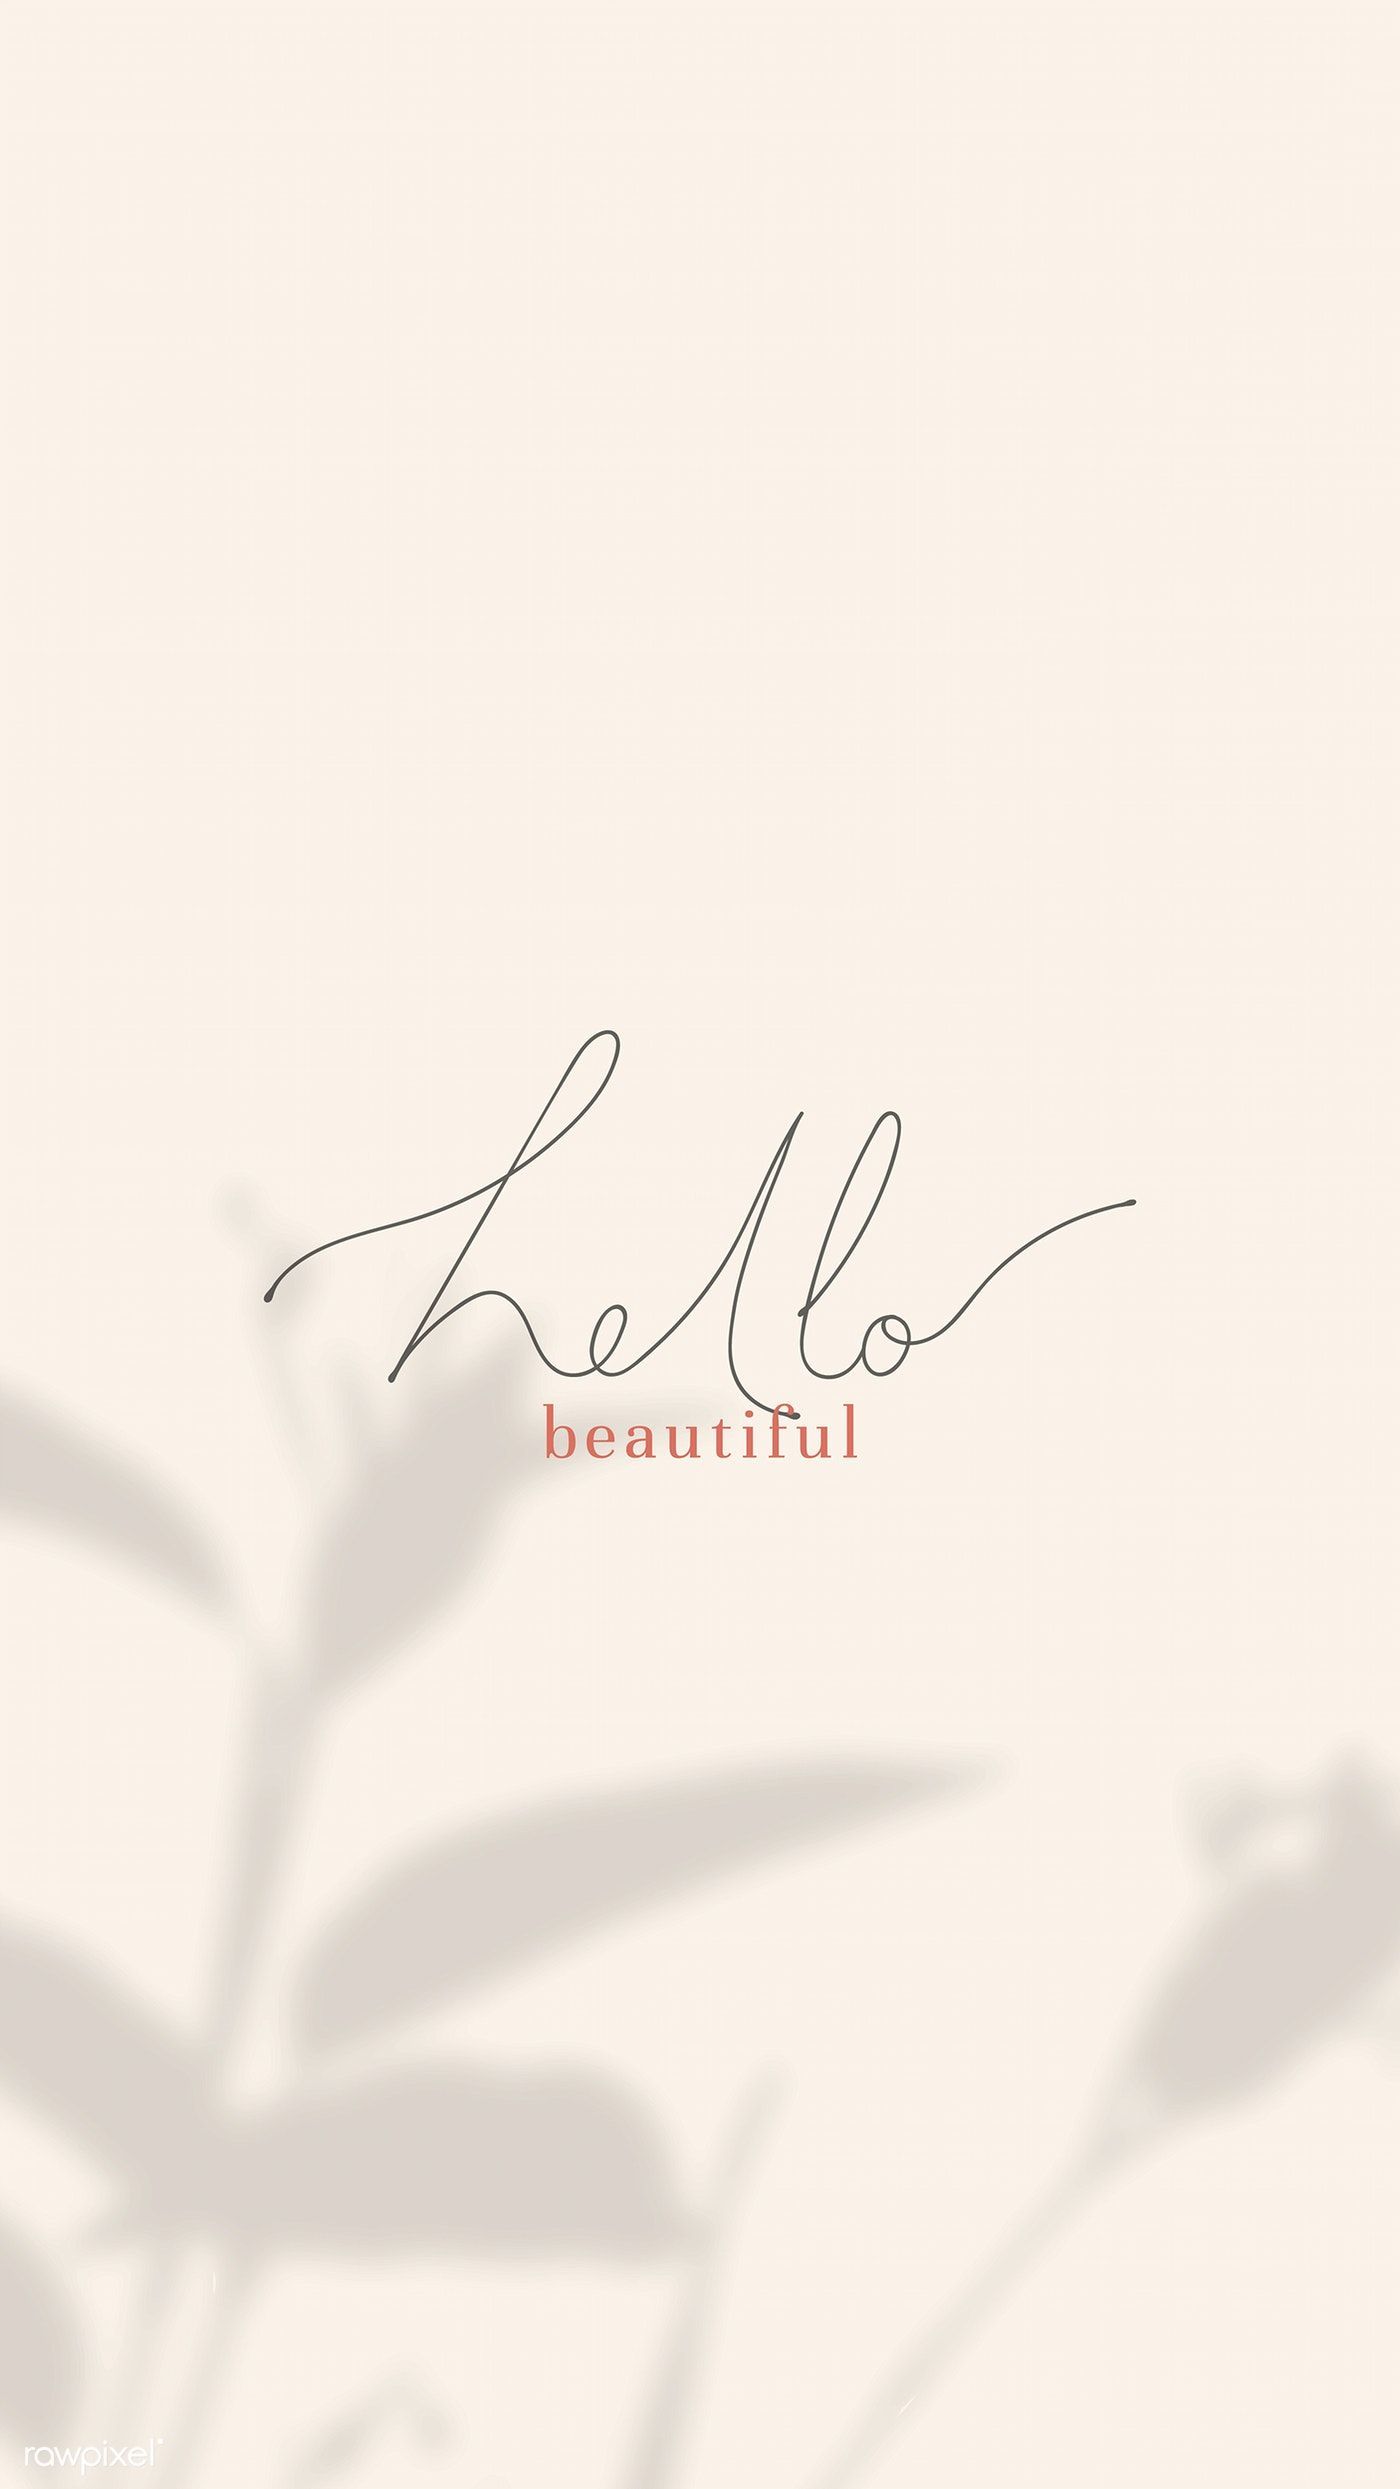 Download free vector of Hello beautiful mobile wallpaper vector 2041761 -   hello beauty Wallpaper